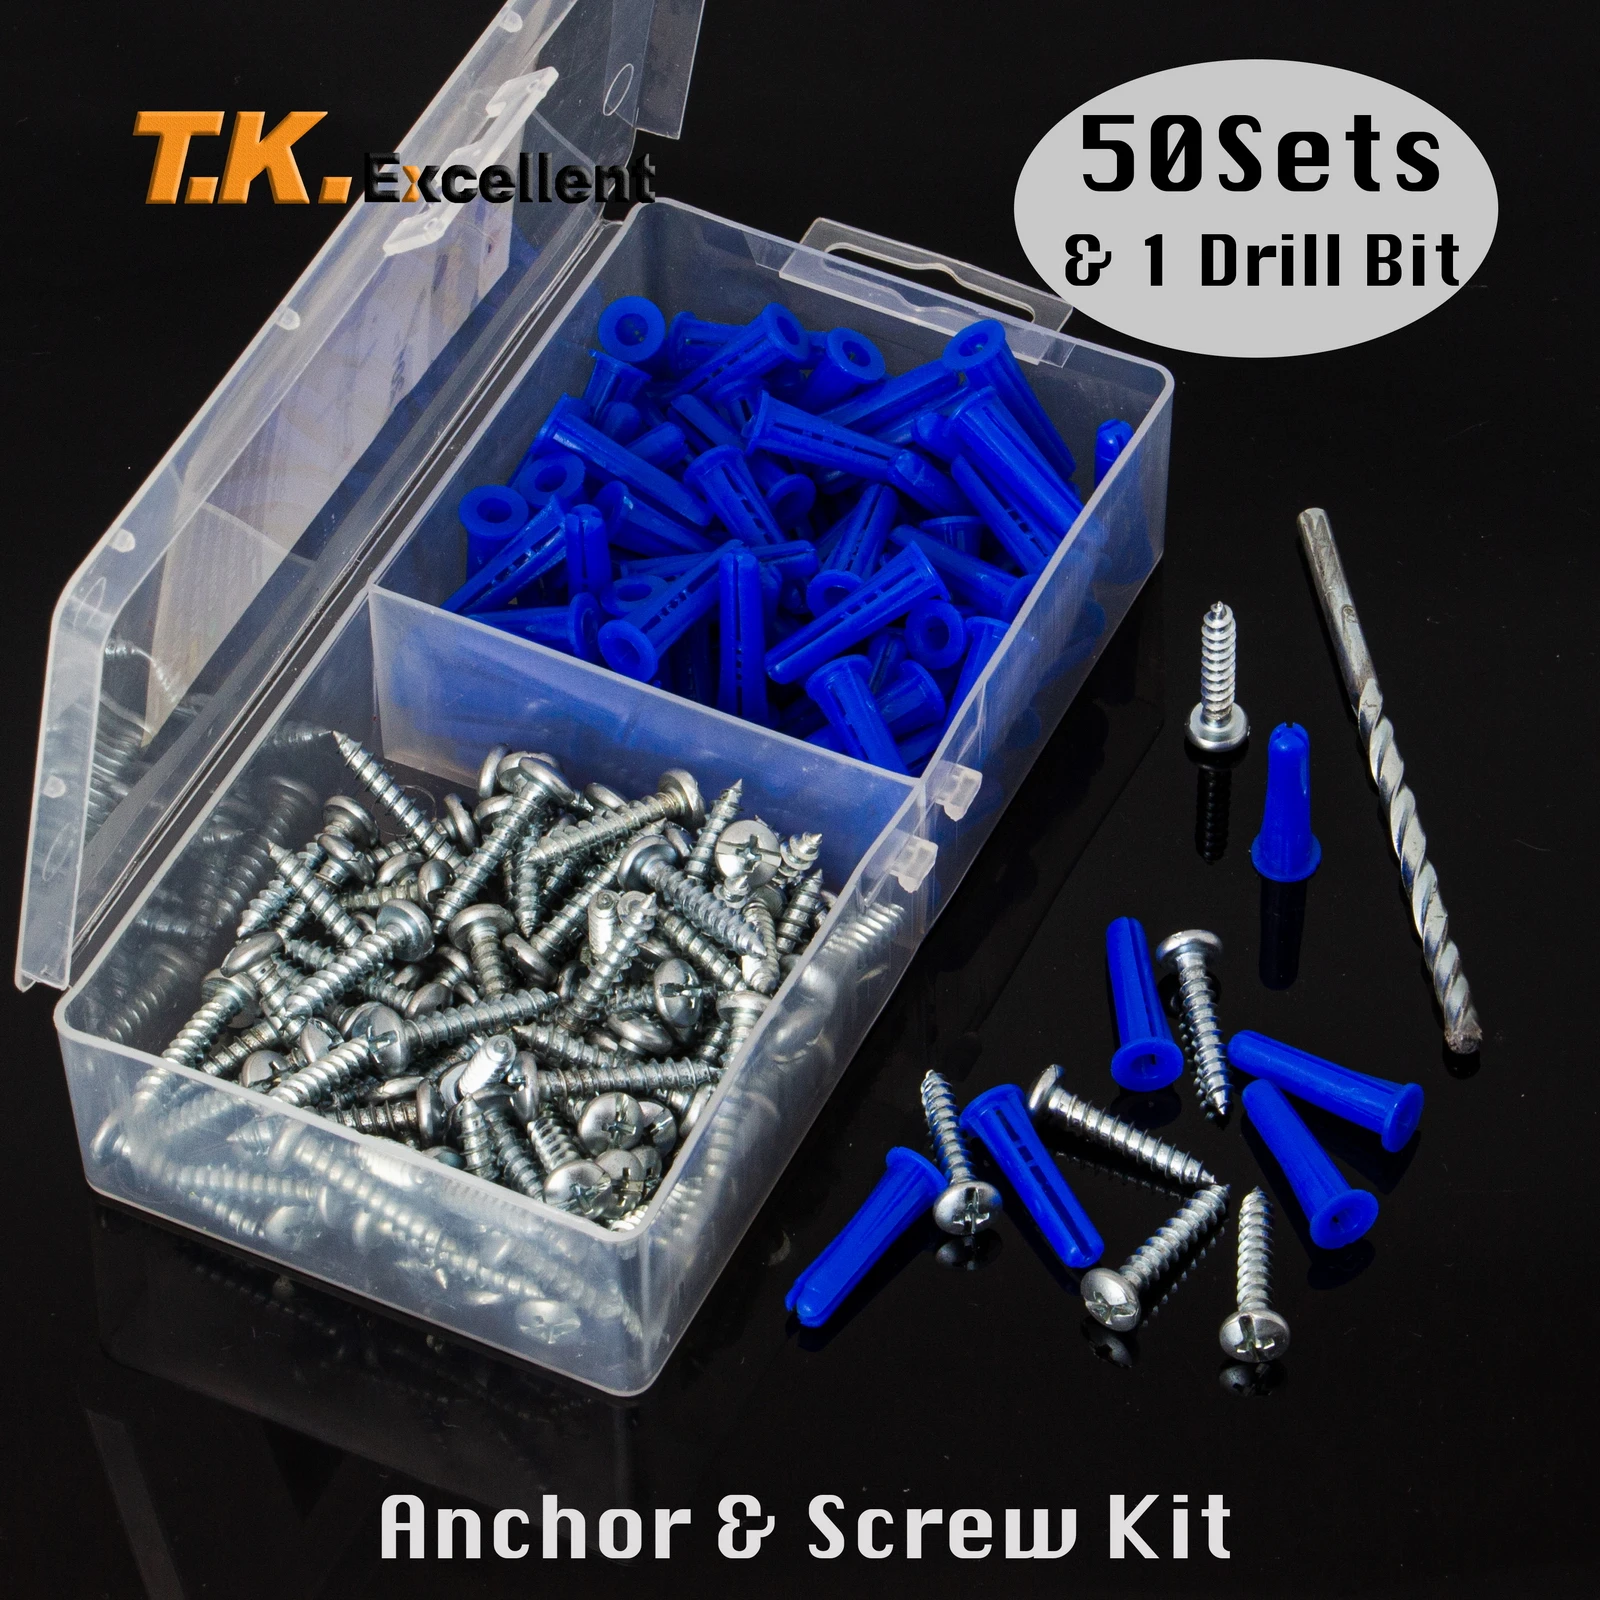 Blue Conical Plastic Anchors and Self Tapping Screws and Drill Bit,201 Pieces 